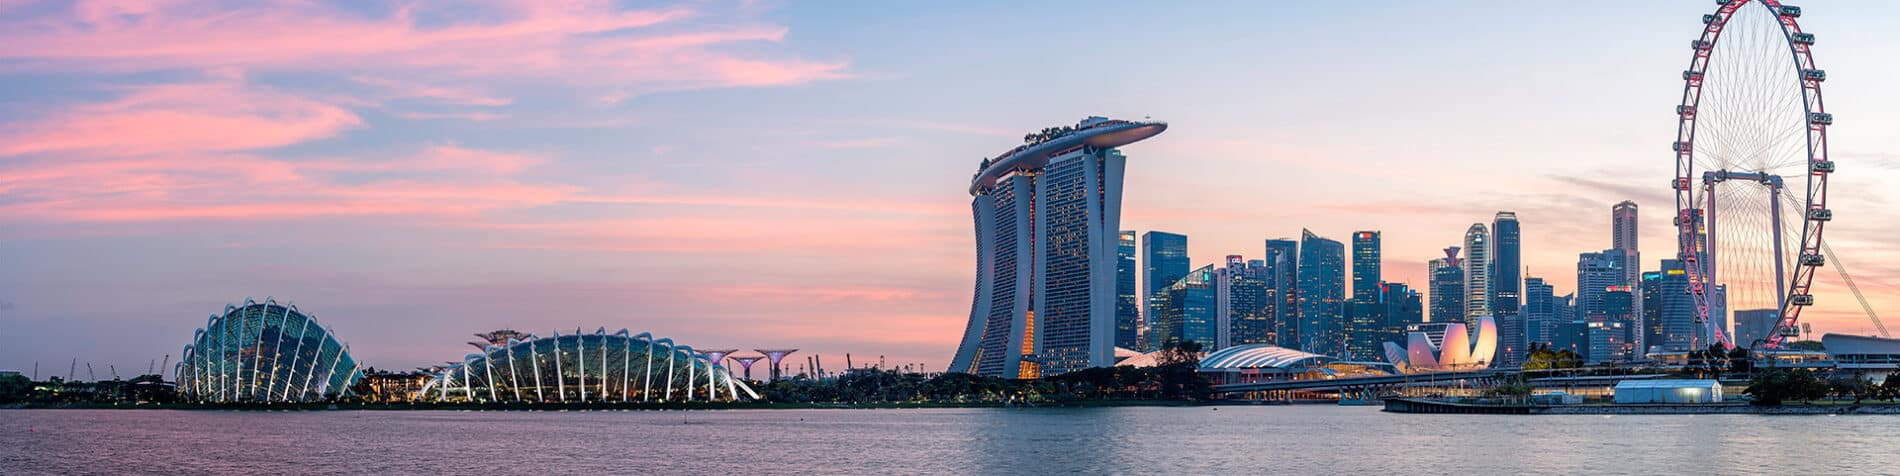 SAP.iO Foundry Singapore Kicks Off Accelerator Program Focused on the Energy and Natural Resources Industries in Australia and New Zealand